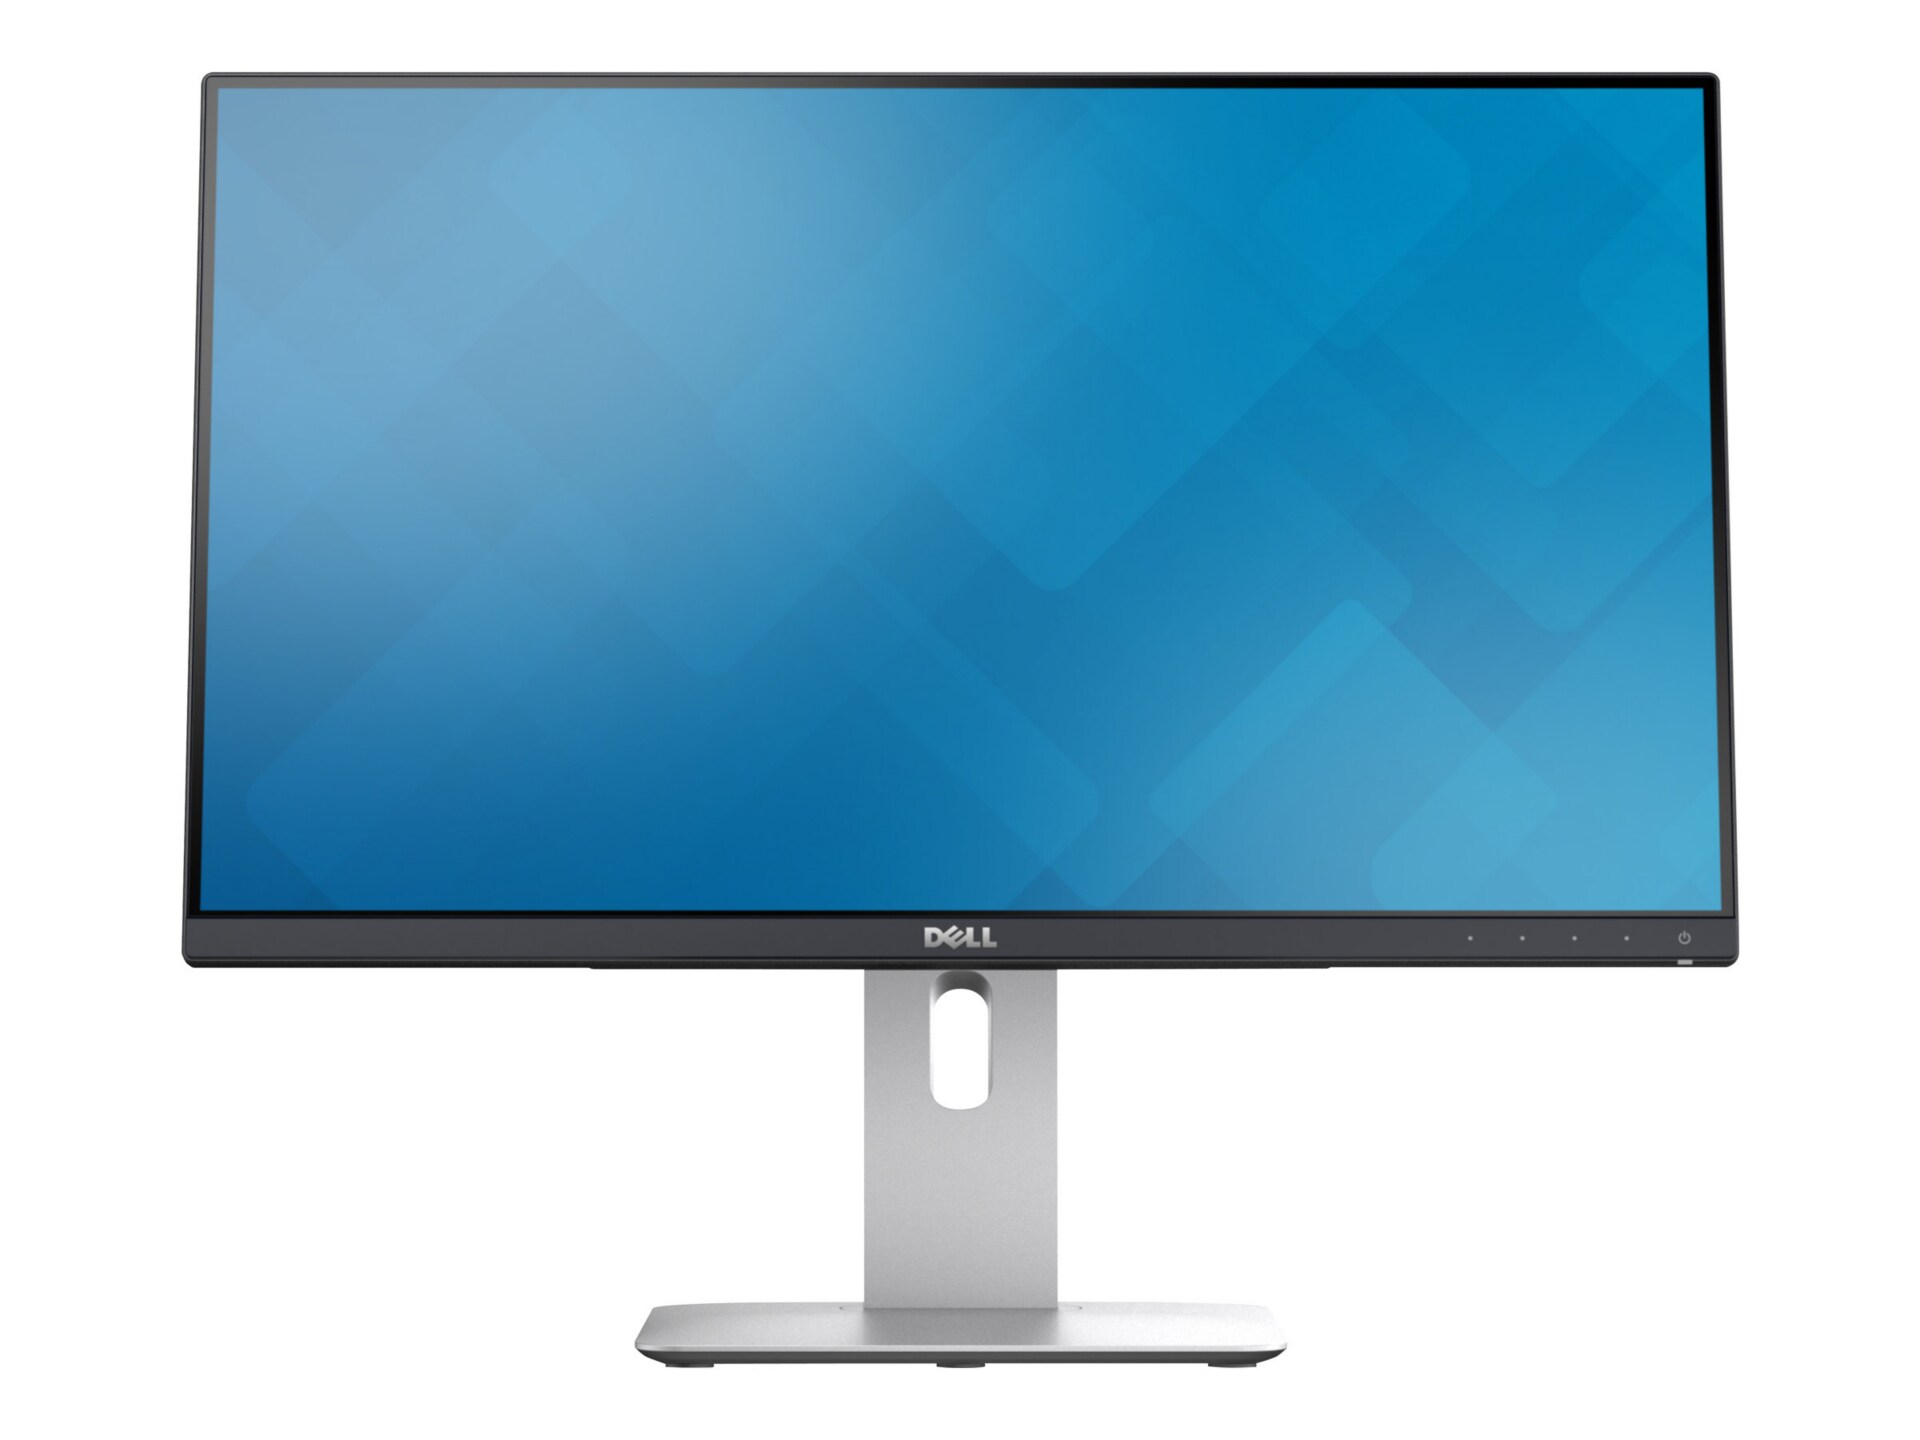 Dell UltraSharp U2414H - LED monitor - Full HD (1080p) - 24" - with 3-Years Advanced Exchange Service and Premium Panel